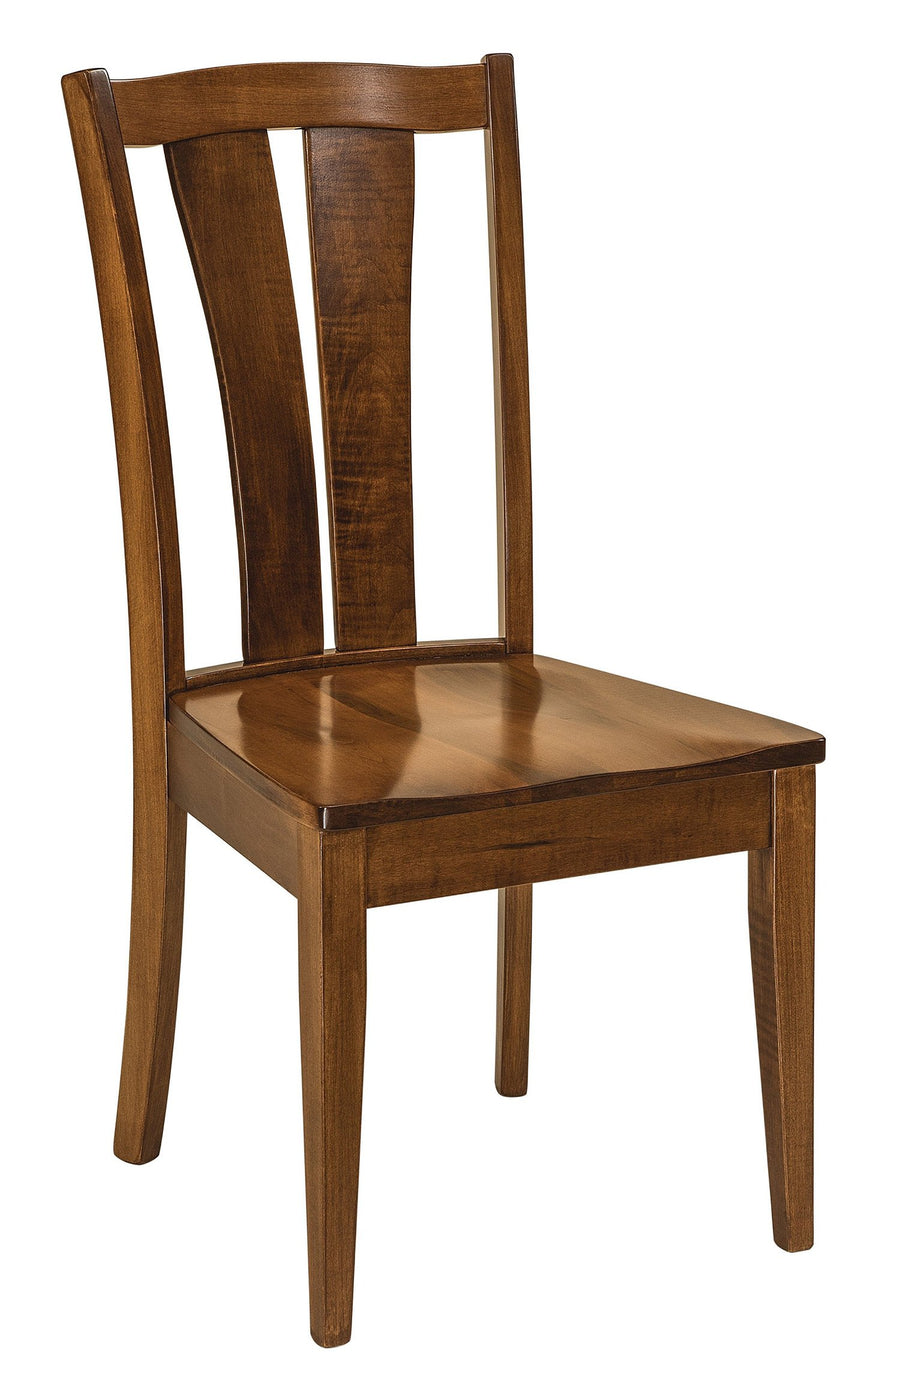 Brawley Amish Side Chair - Foothills Amish Furniture